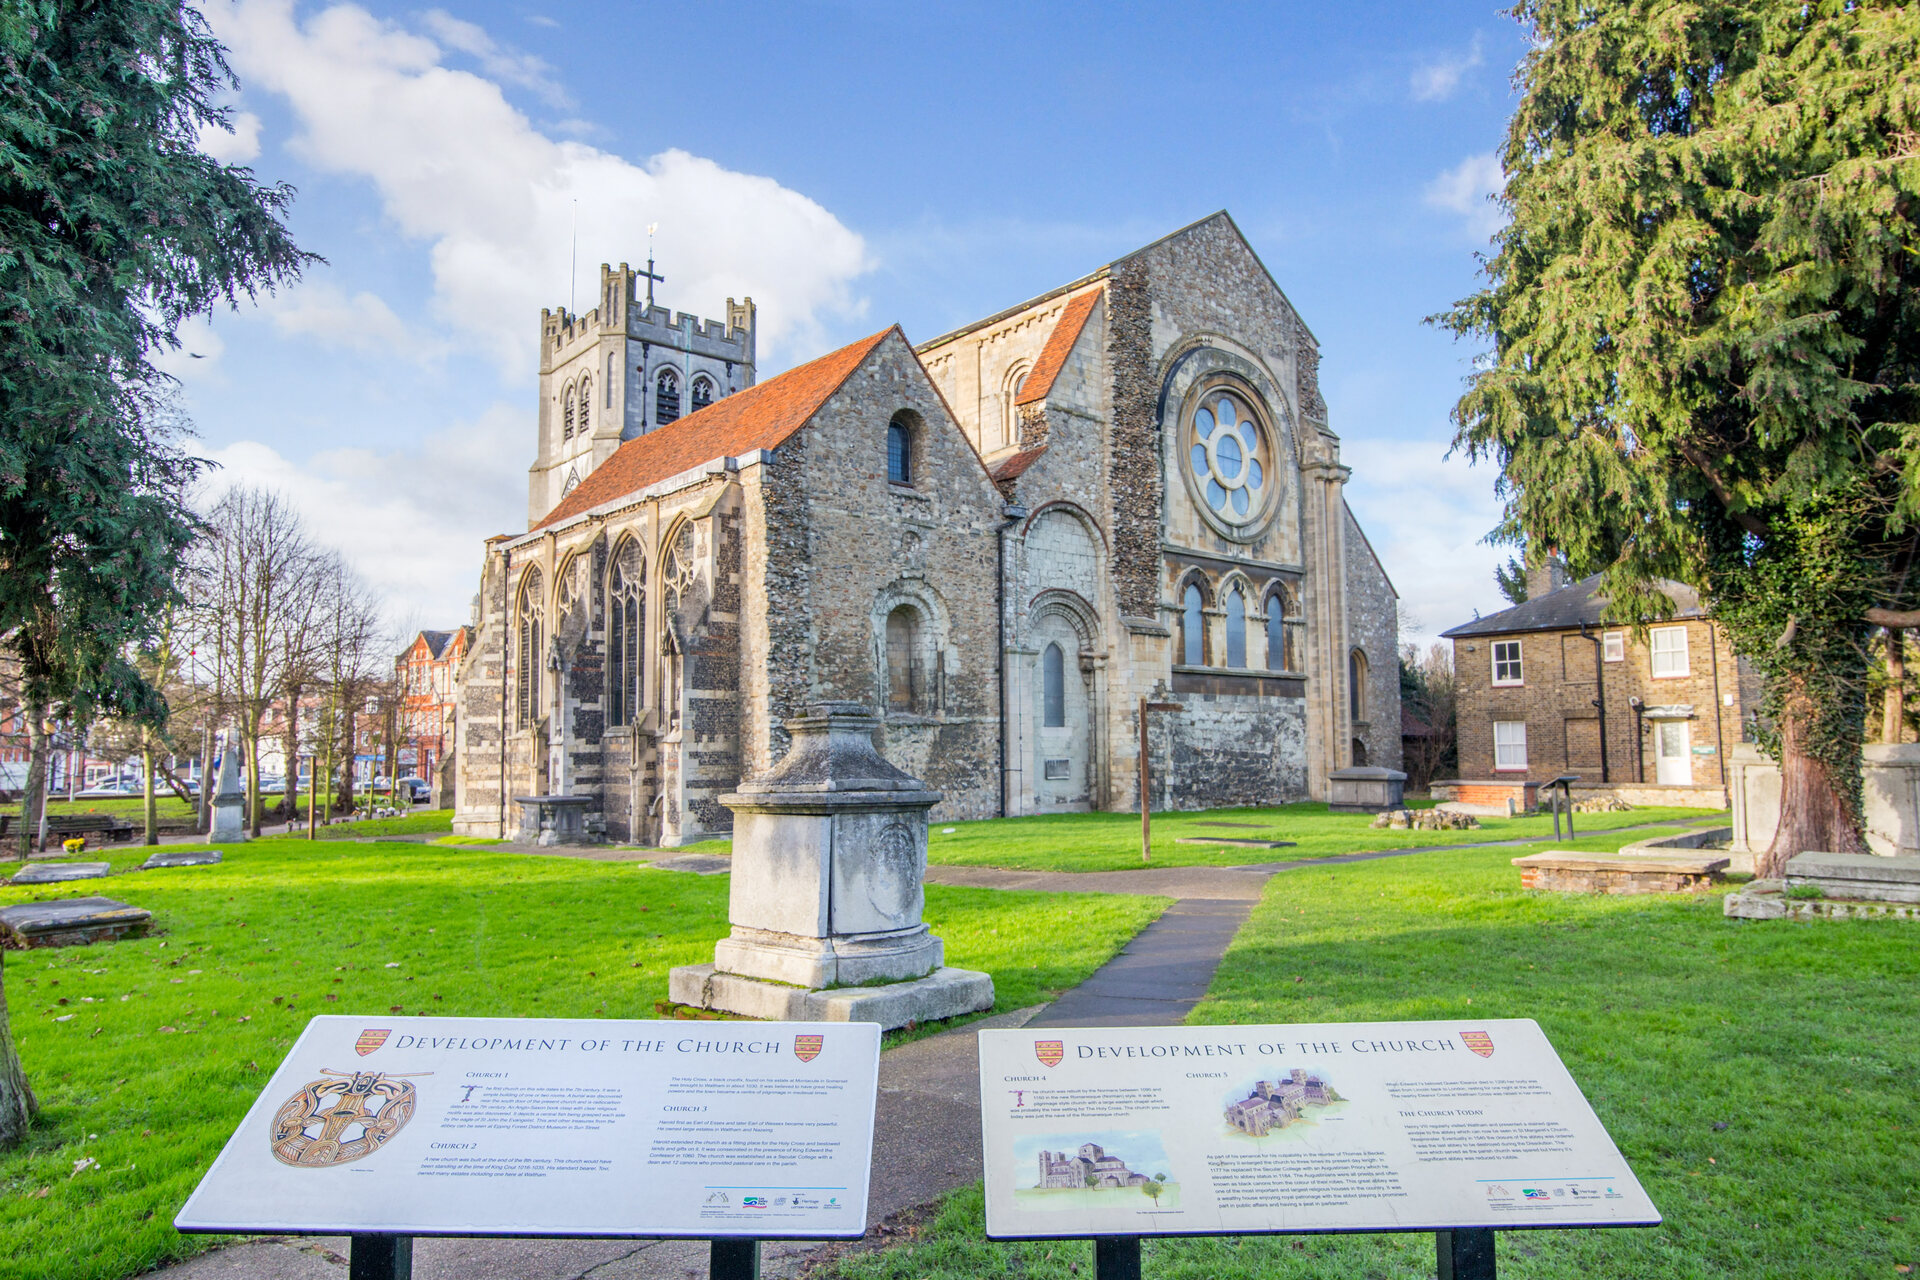 Waltham abbey on a lovely day, with information signs in foreground.